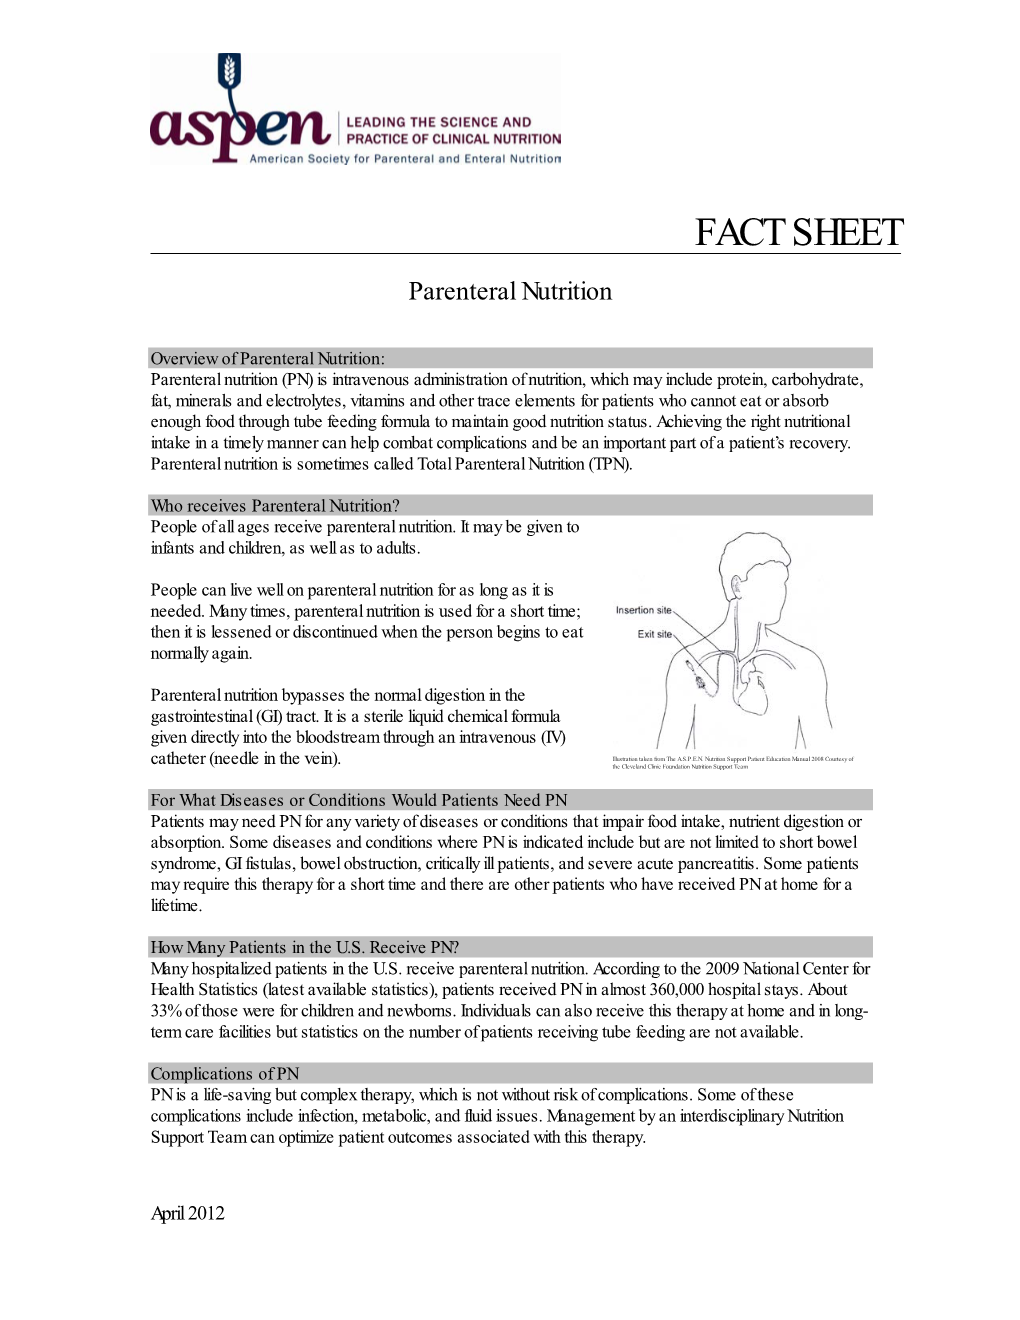 Parenteral Nutrition Fact Sheet Page 2